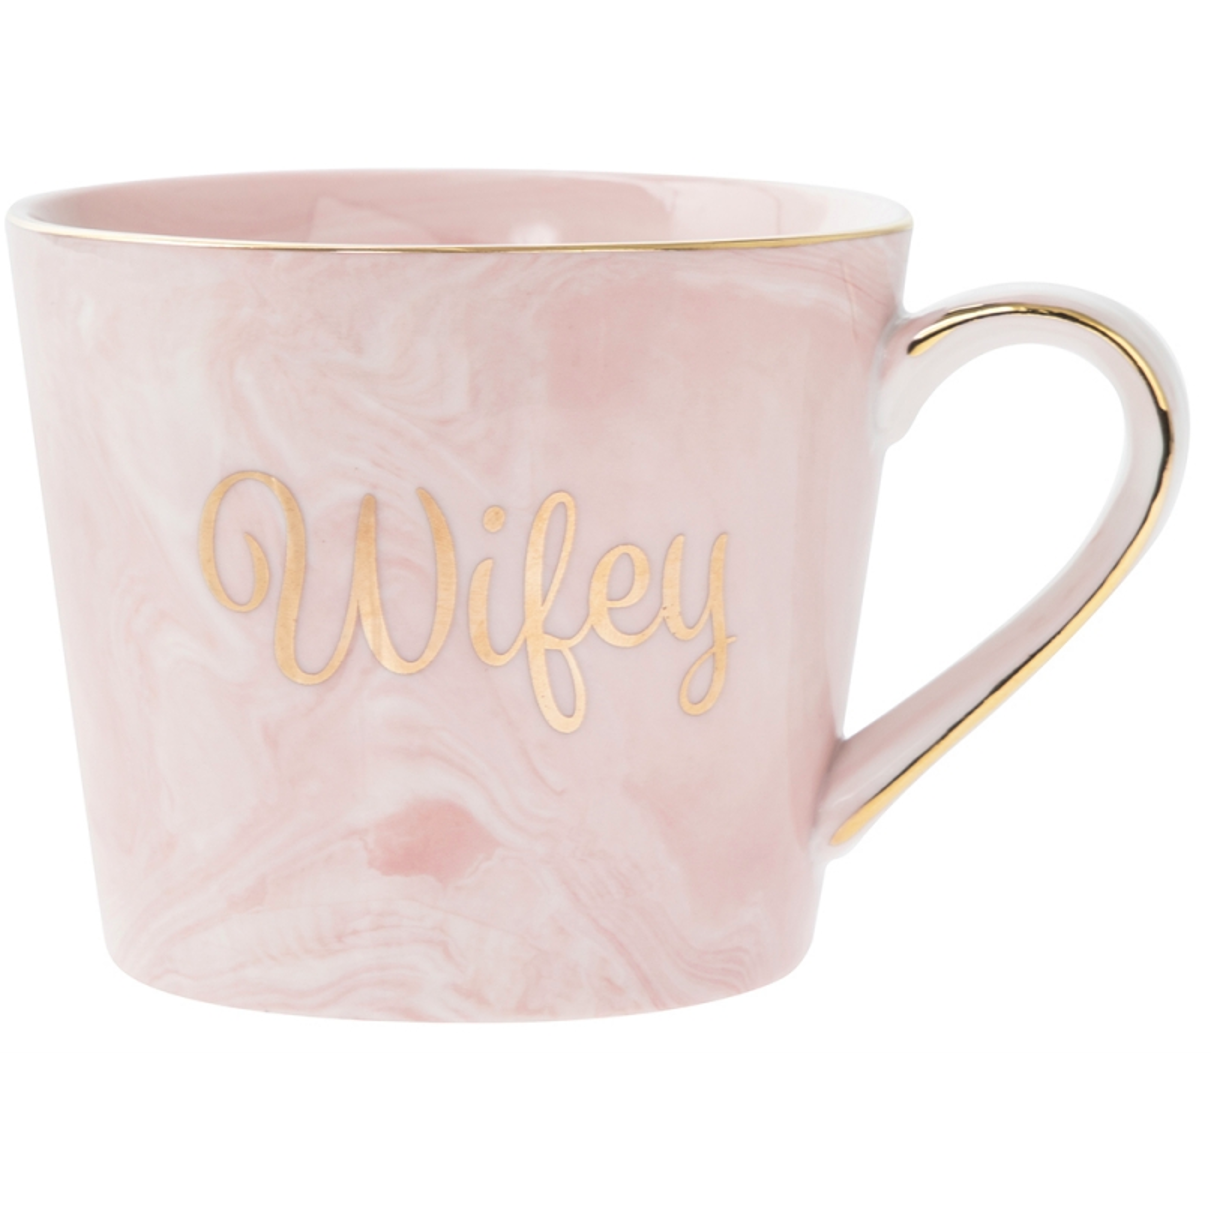 Marble Mug - Wifey Not specified